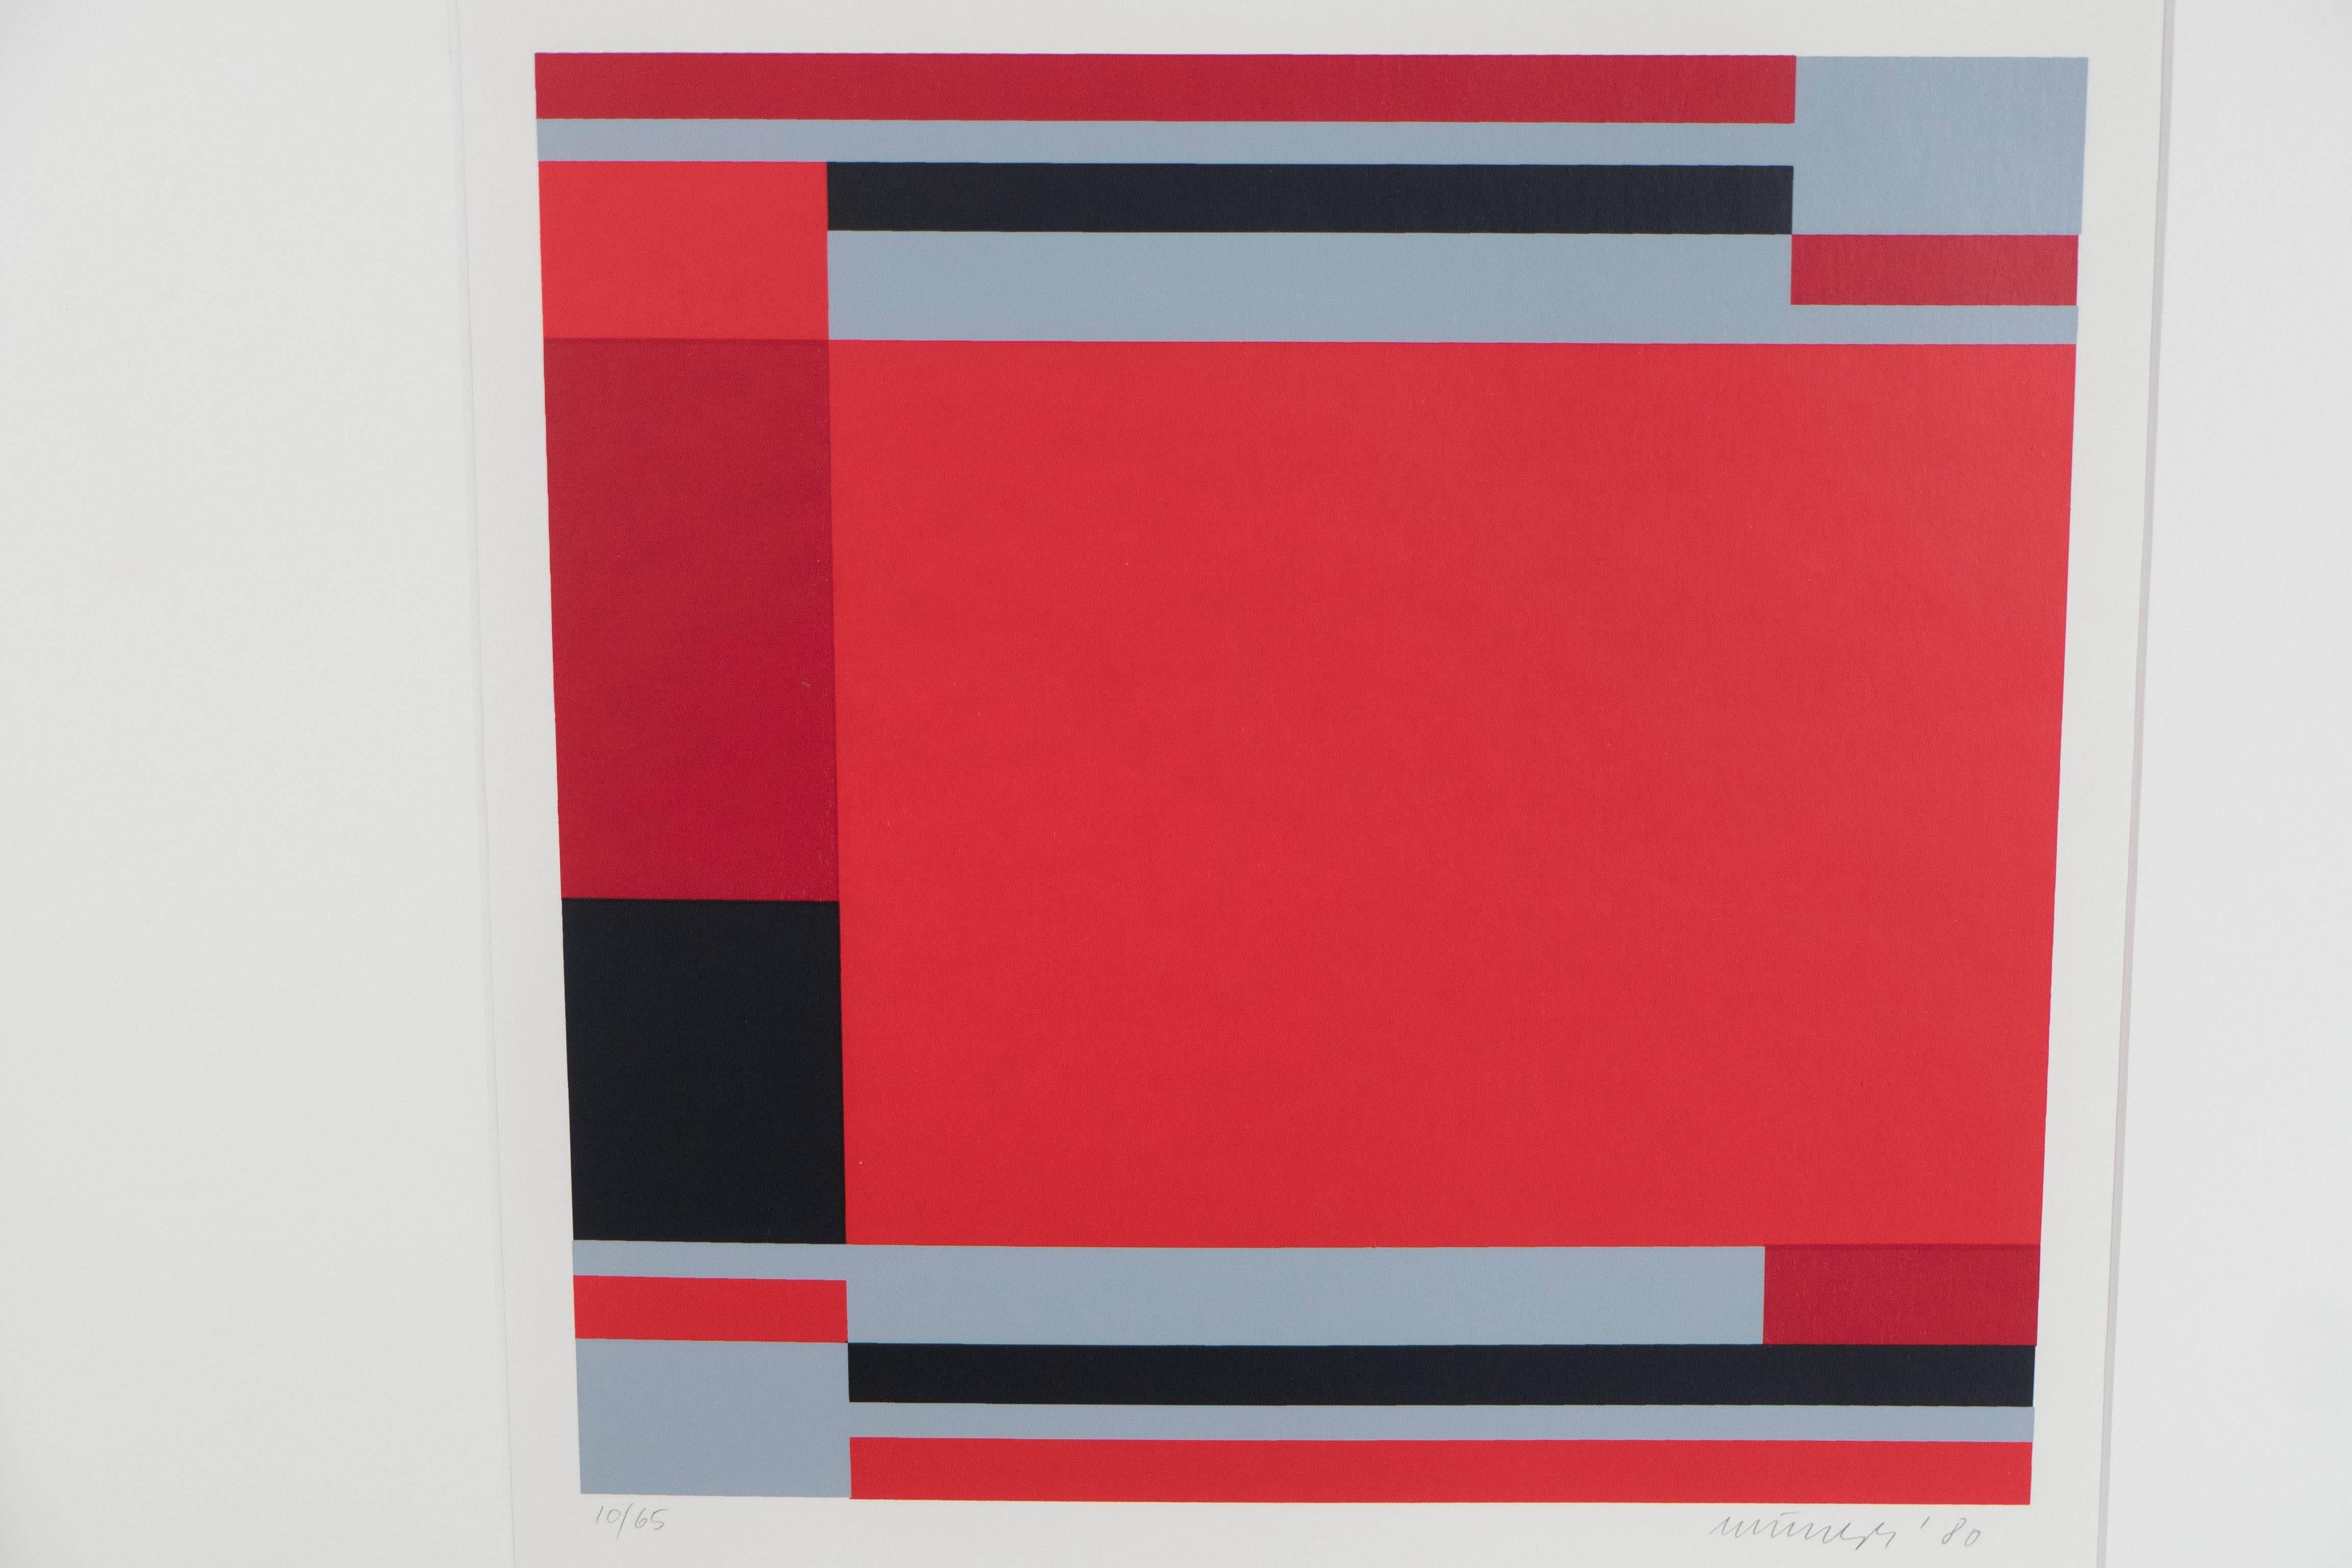 This 1980 color field silk-screen-print by German born artist Jo Niemeyer (b. 1946), depicts abstract geometric forms in tones of red, grey and black. Markings include signature and date ['80] to the lower right corner in pencil, No. 10/65 to the